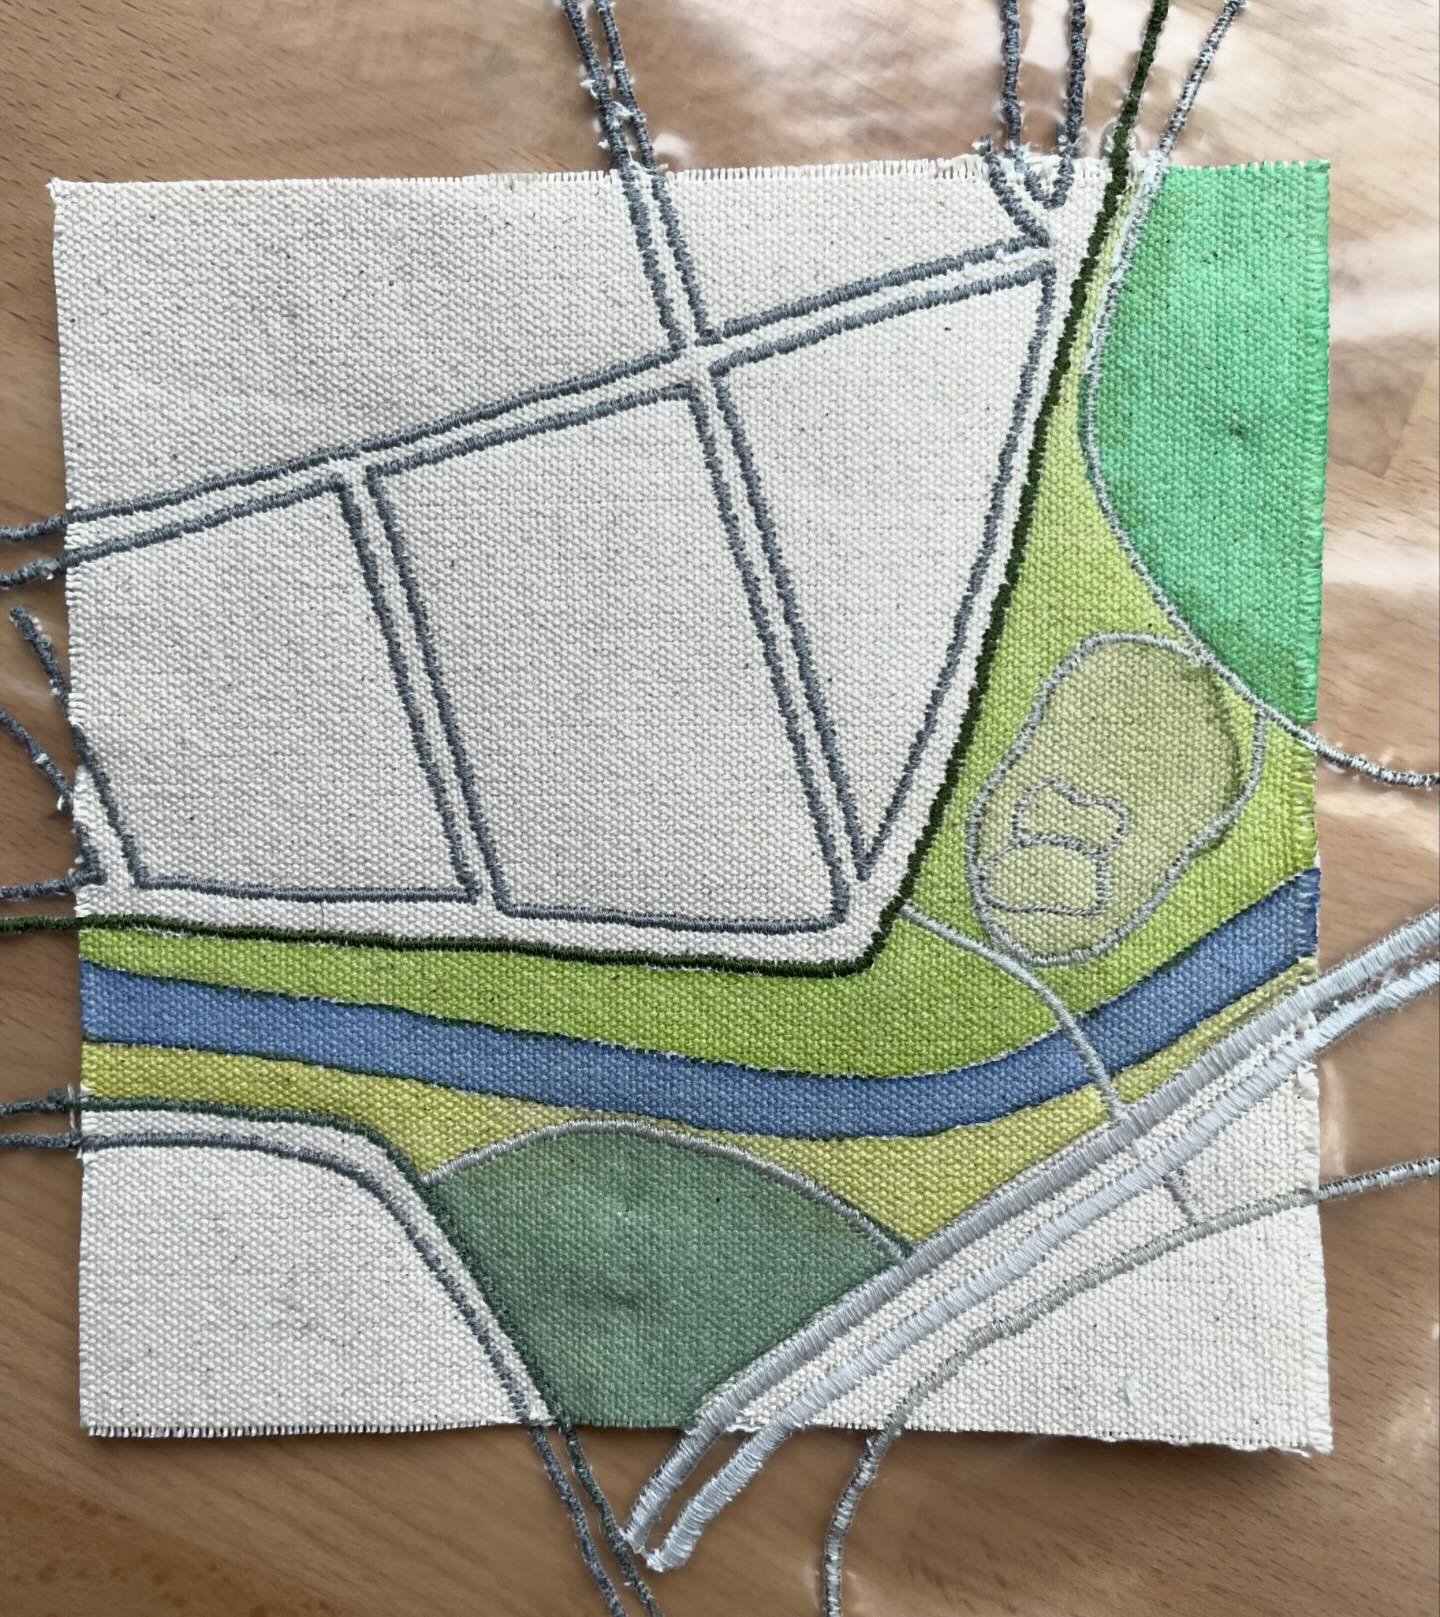 And this is how I do it. Lots of stages and processes, building up the map with stitched layers. This is a commission for a map of a neighbourhood in Sydney which is currently winging its way over to Australia.  #stitchedart #stitchedmap #textileart 